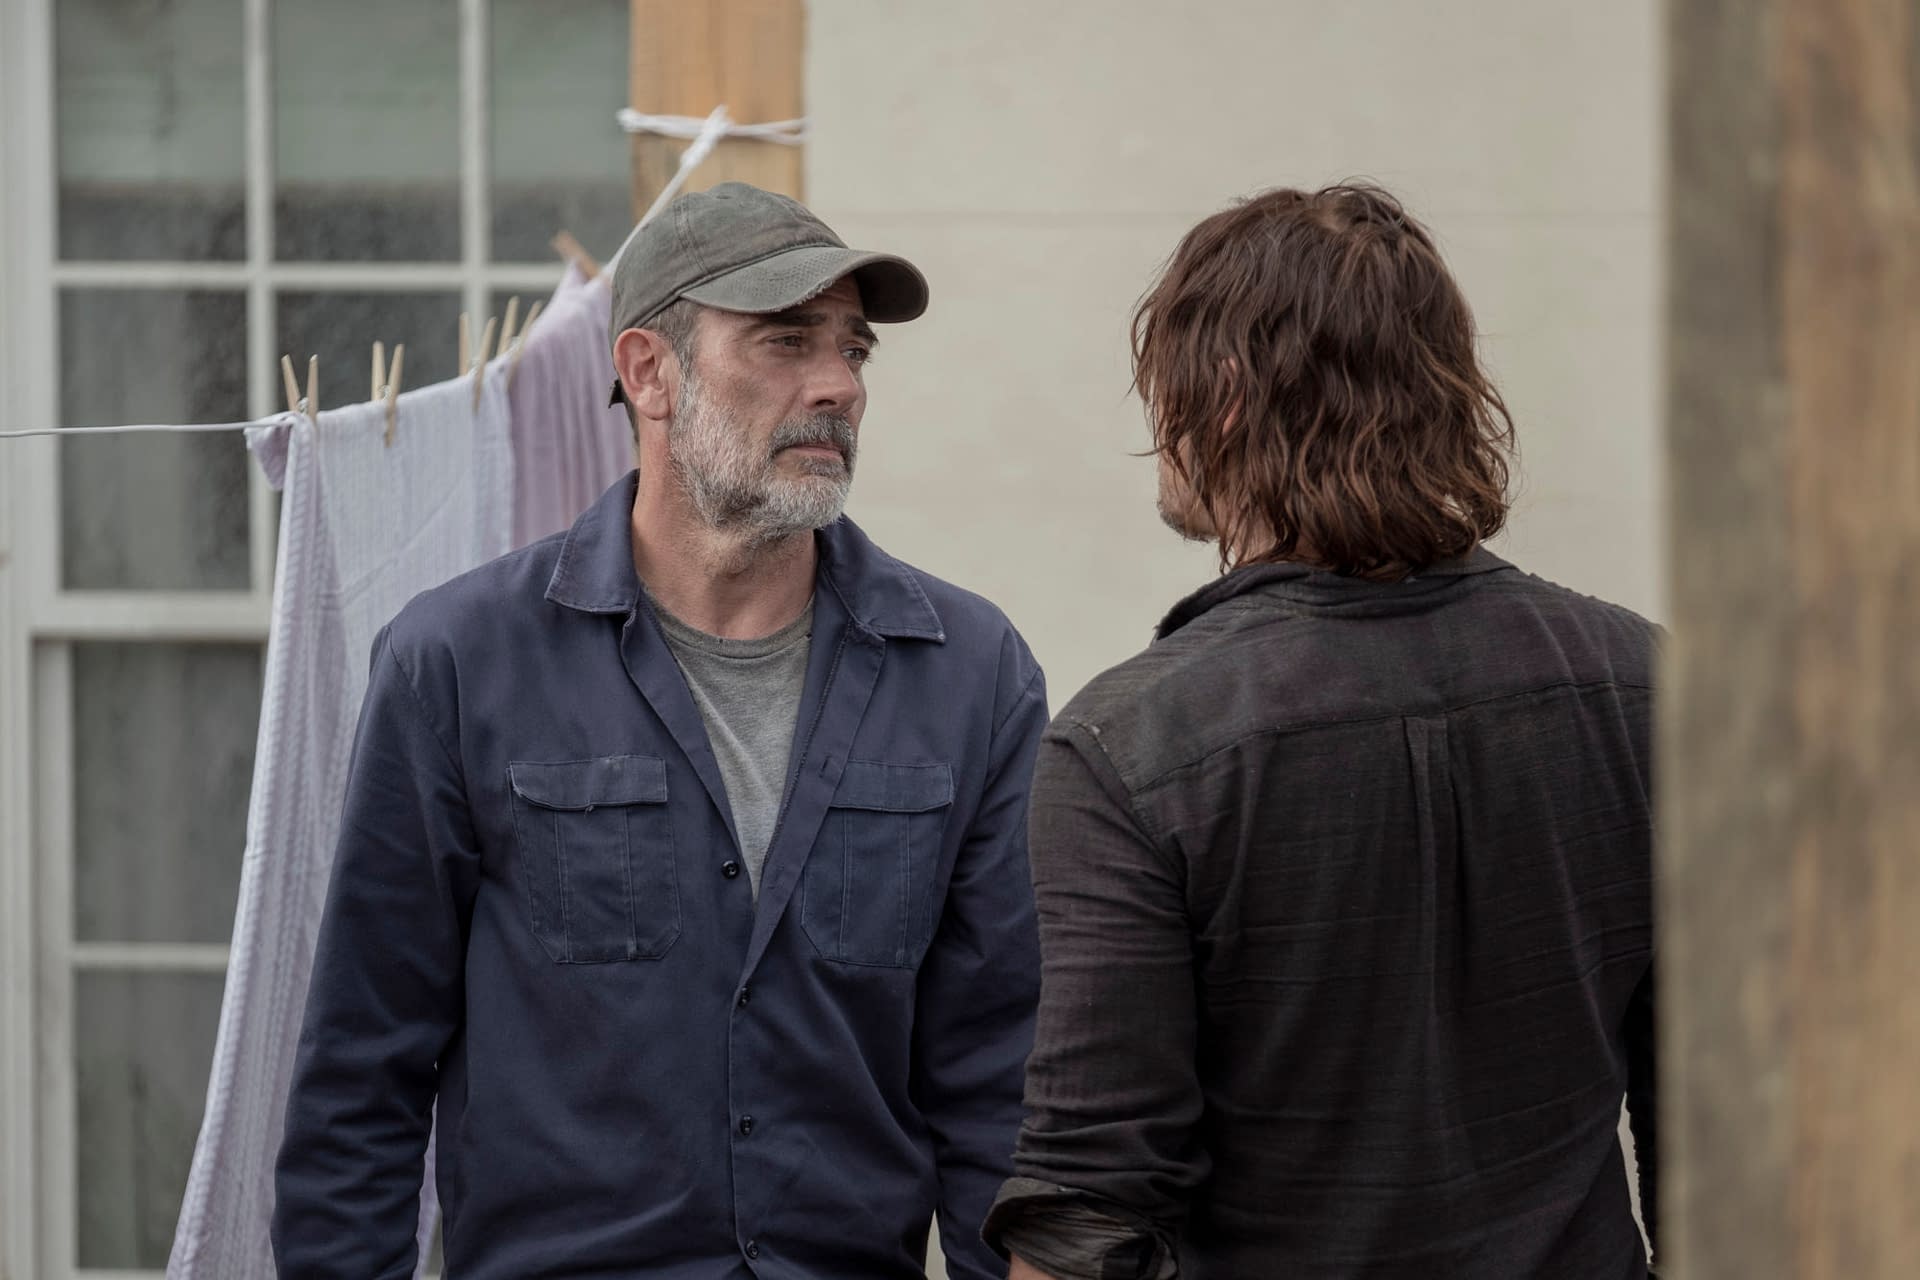 "The Walking Dead" Season 10 Table Read Has Us Asking: What's the Deal with the Satellites? [PREVIEW]